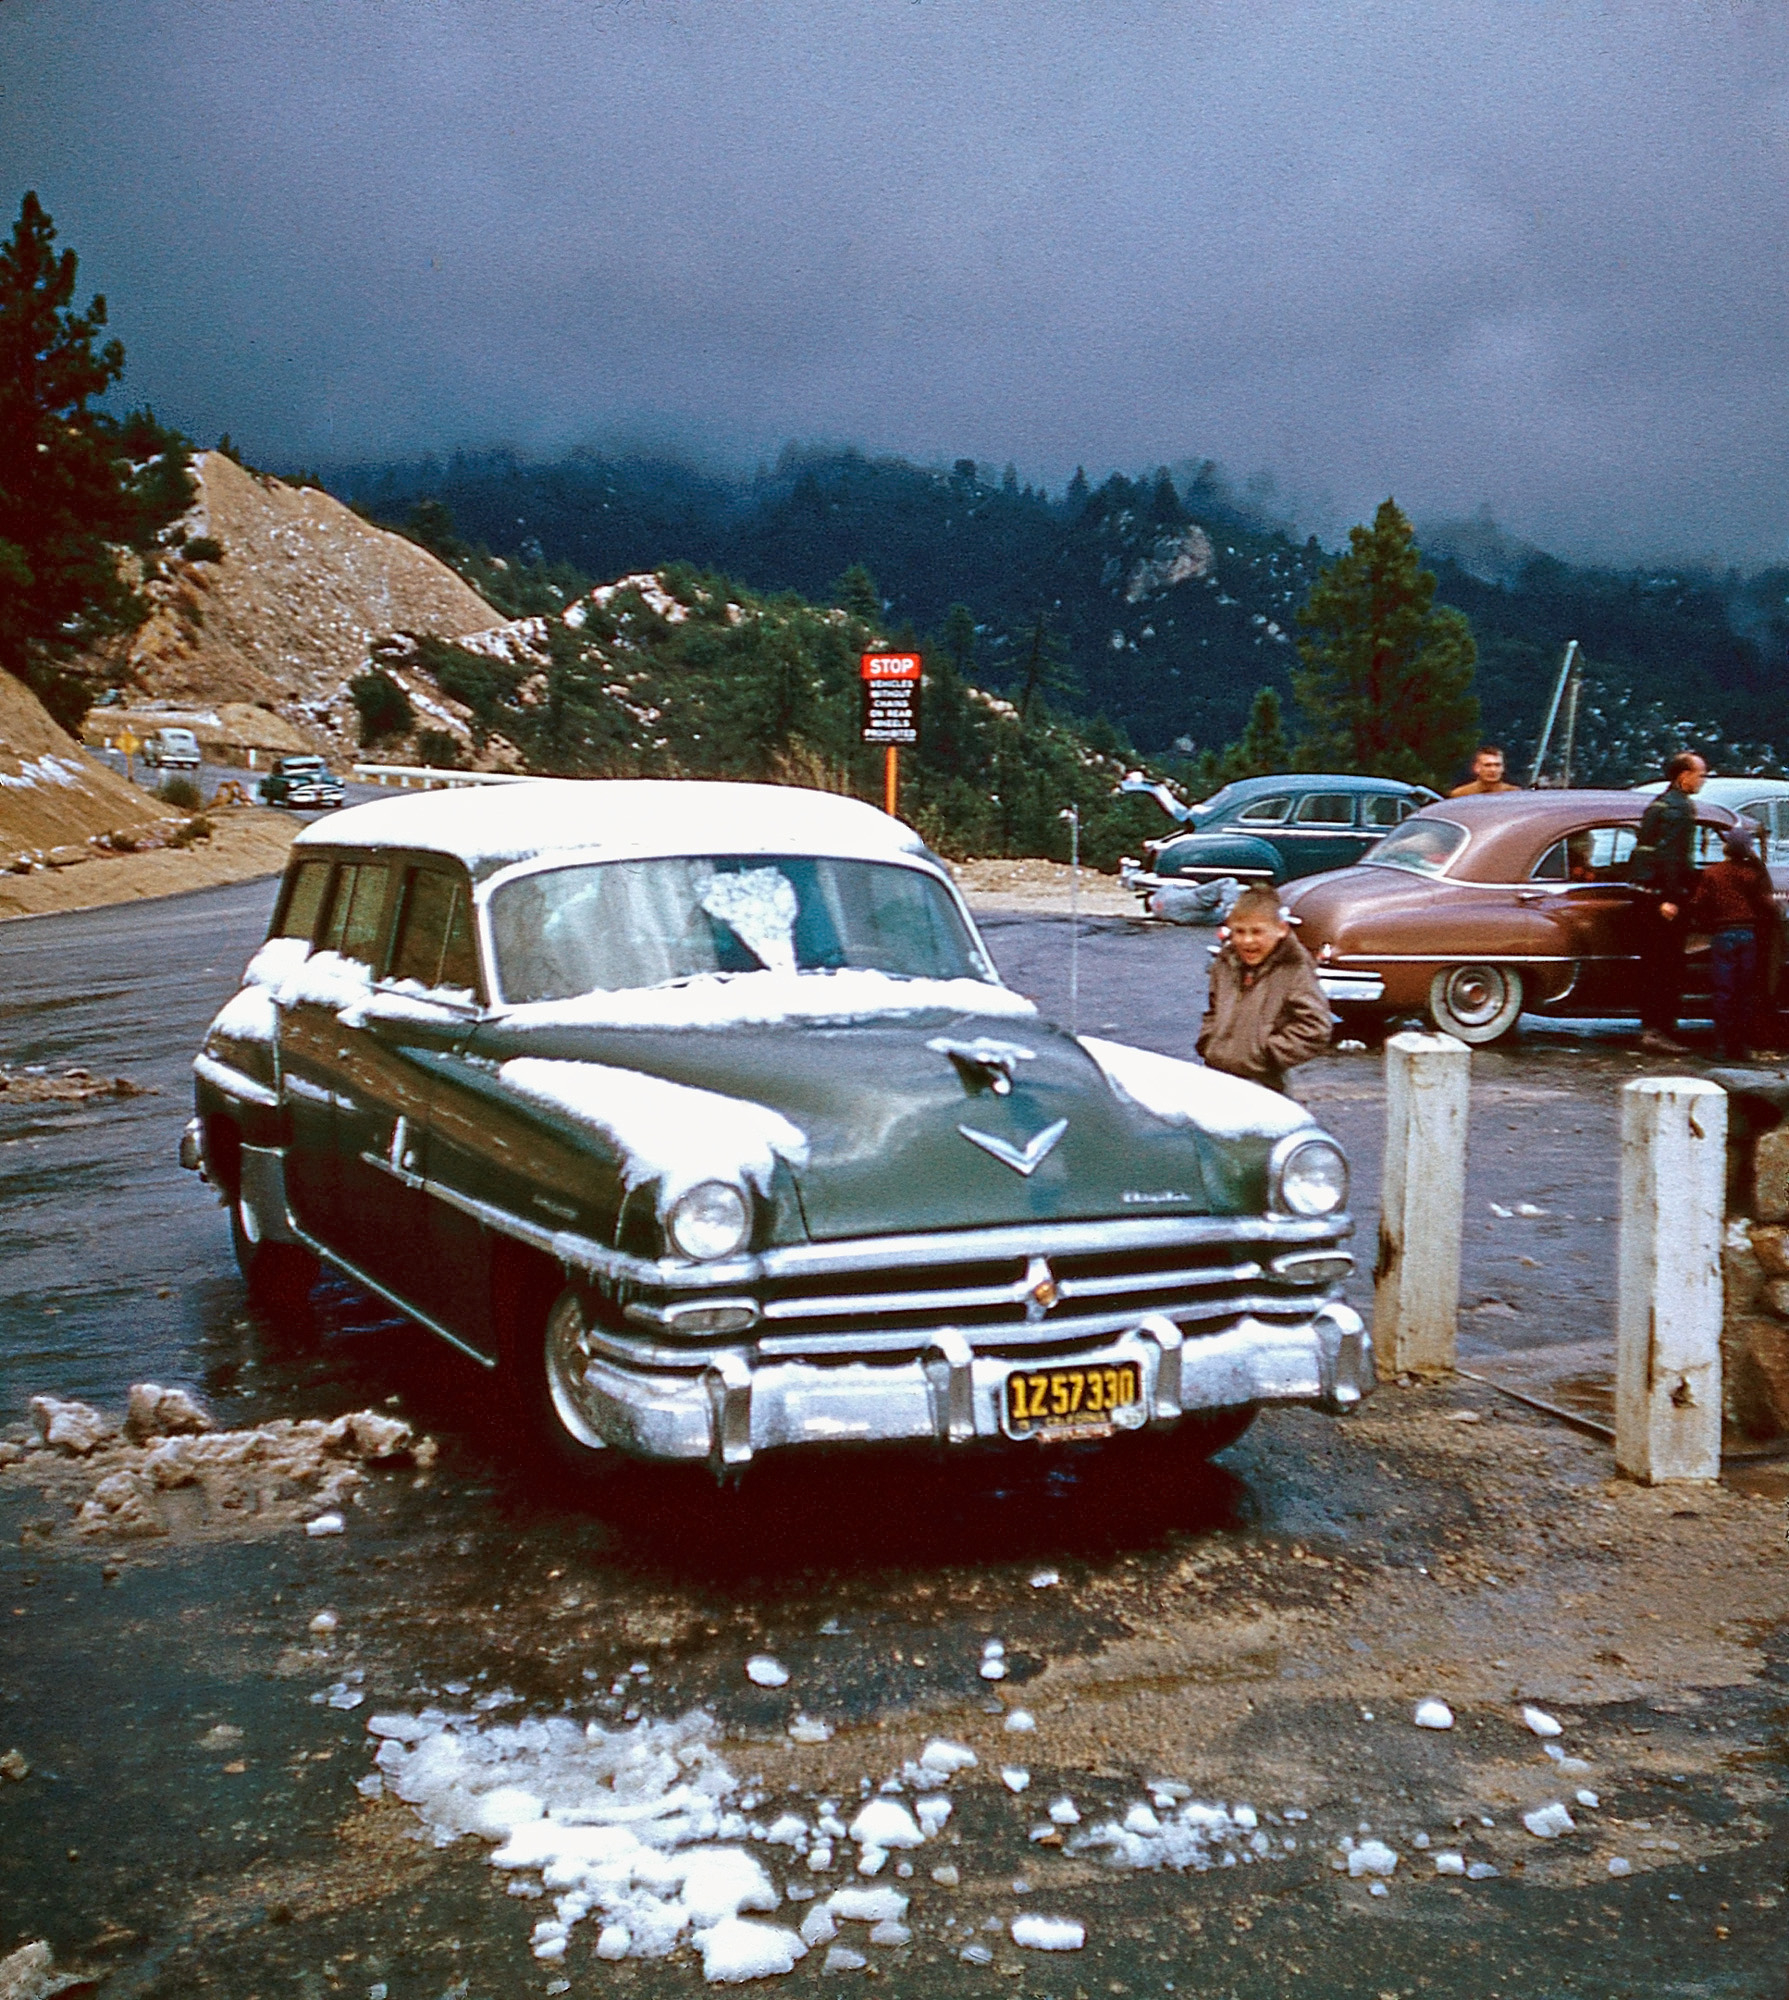 One half of a Kodachrome Stereo Slide marked "On the way up City Creek." This is somewhere on California state highway 30 (now 330), aka City Creek Rd., headed towards Running Springs, most likely to the cabin seen here. View full size.